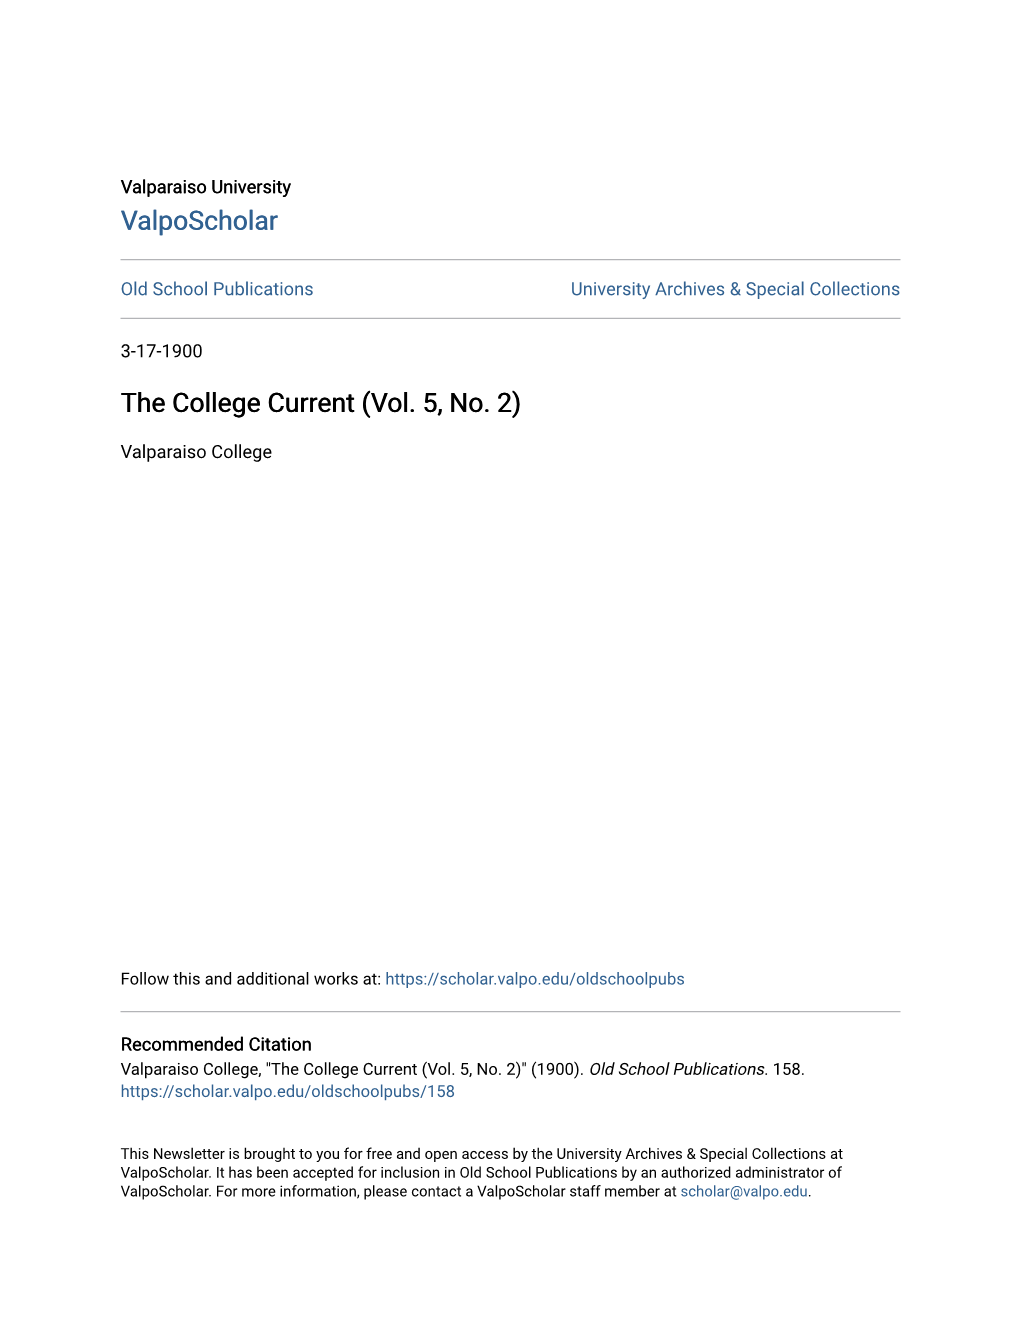 The College Current (Vol